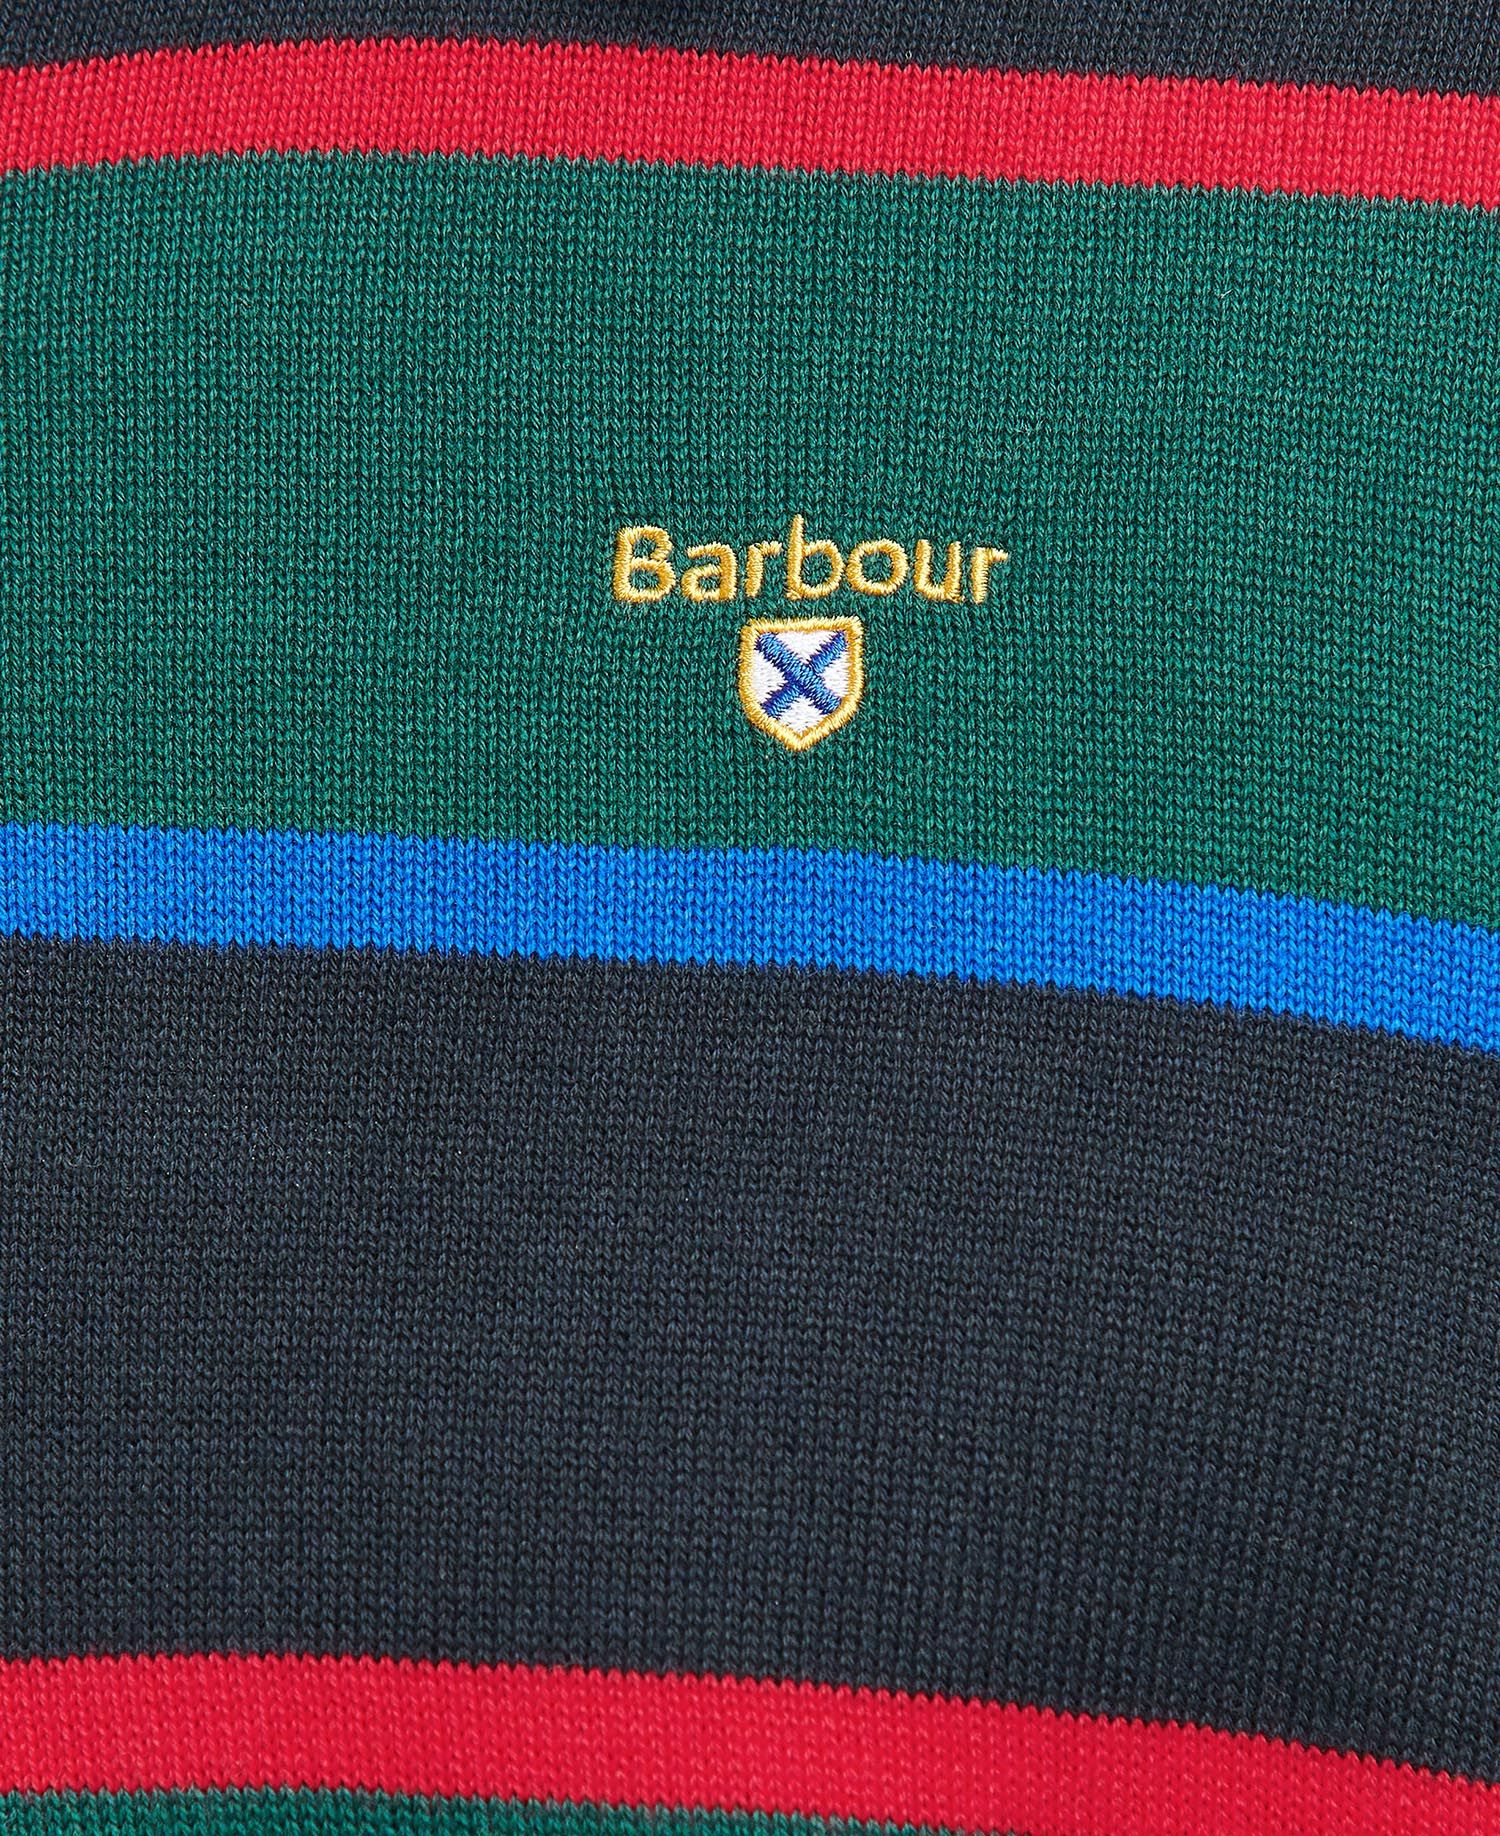 Barbour Radcliffe Knitted Rugby Shirt - Navy